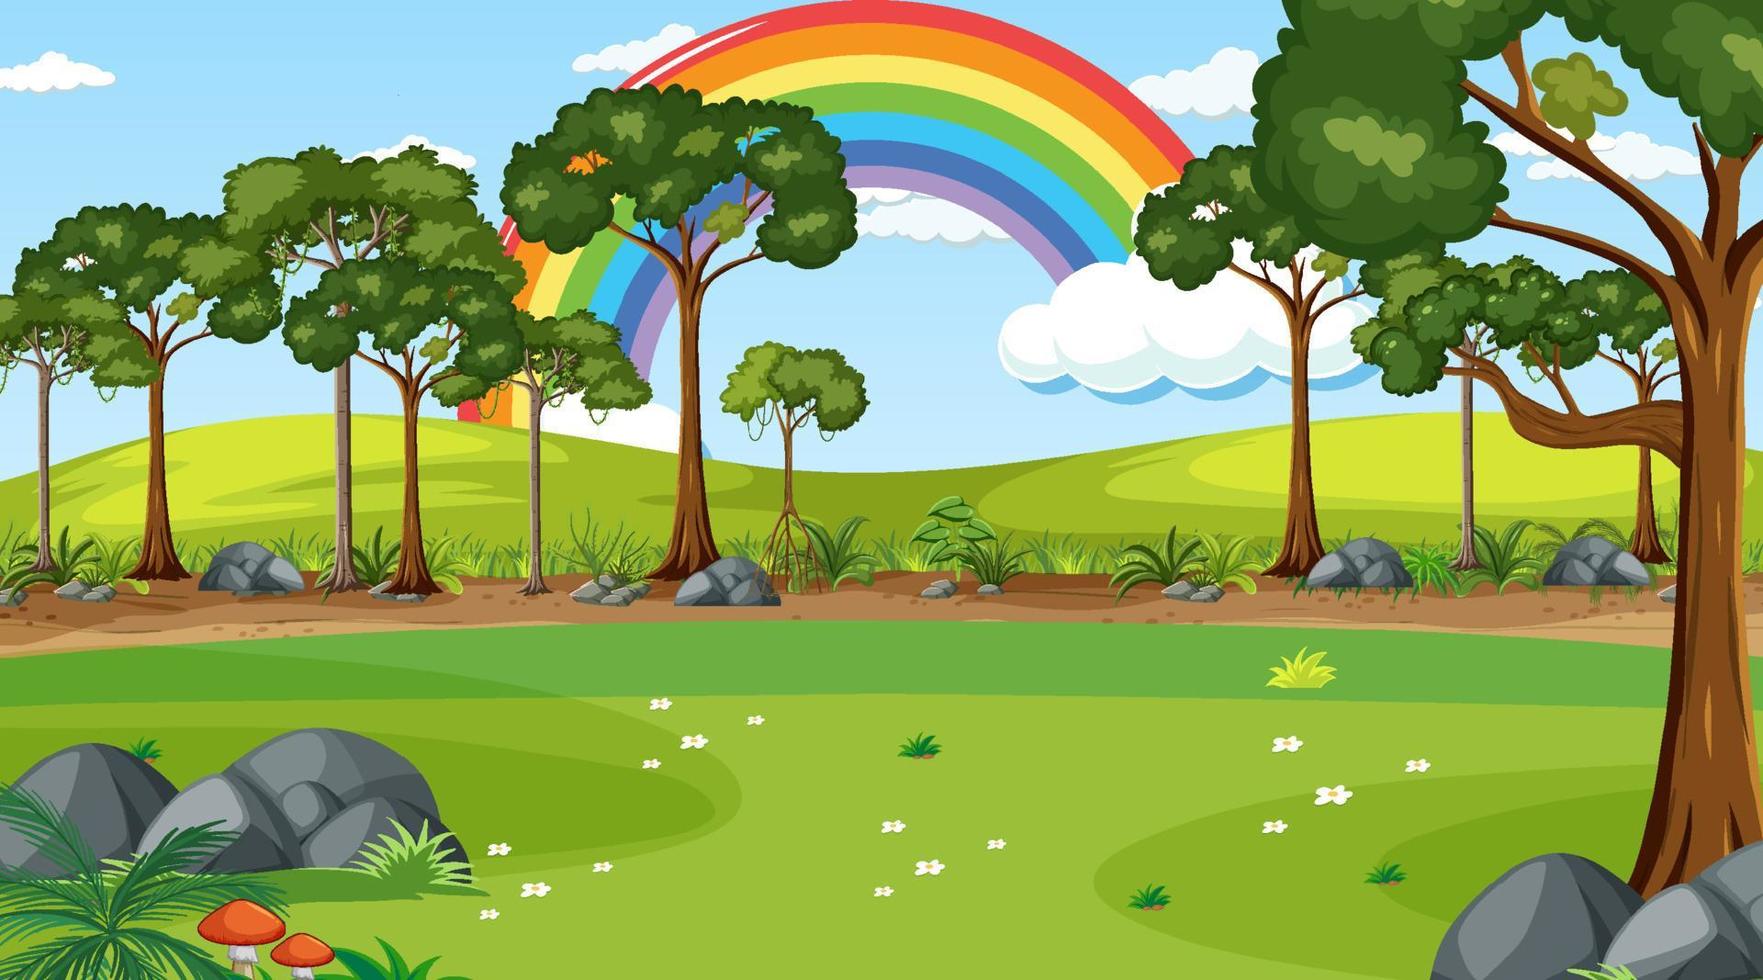 Nature forest scene with rainbow in the sky vector